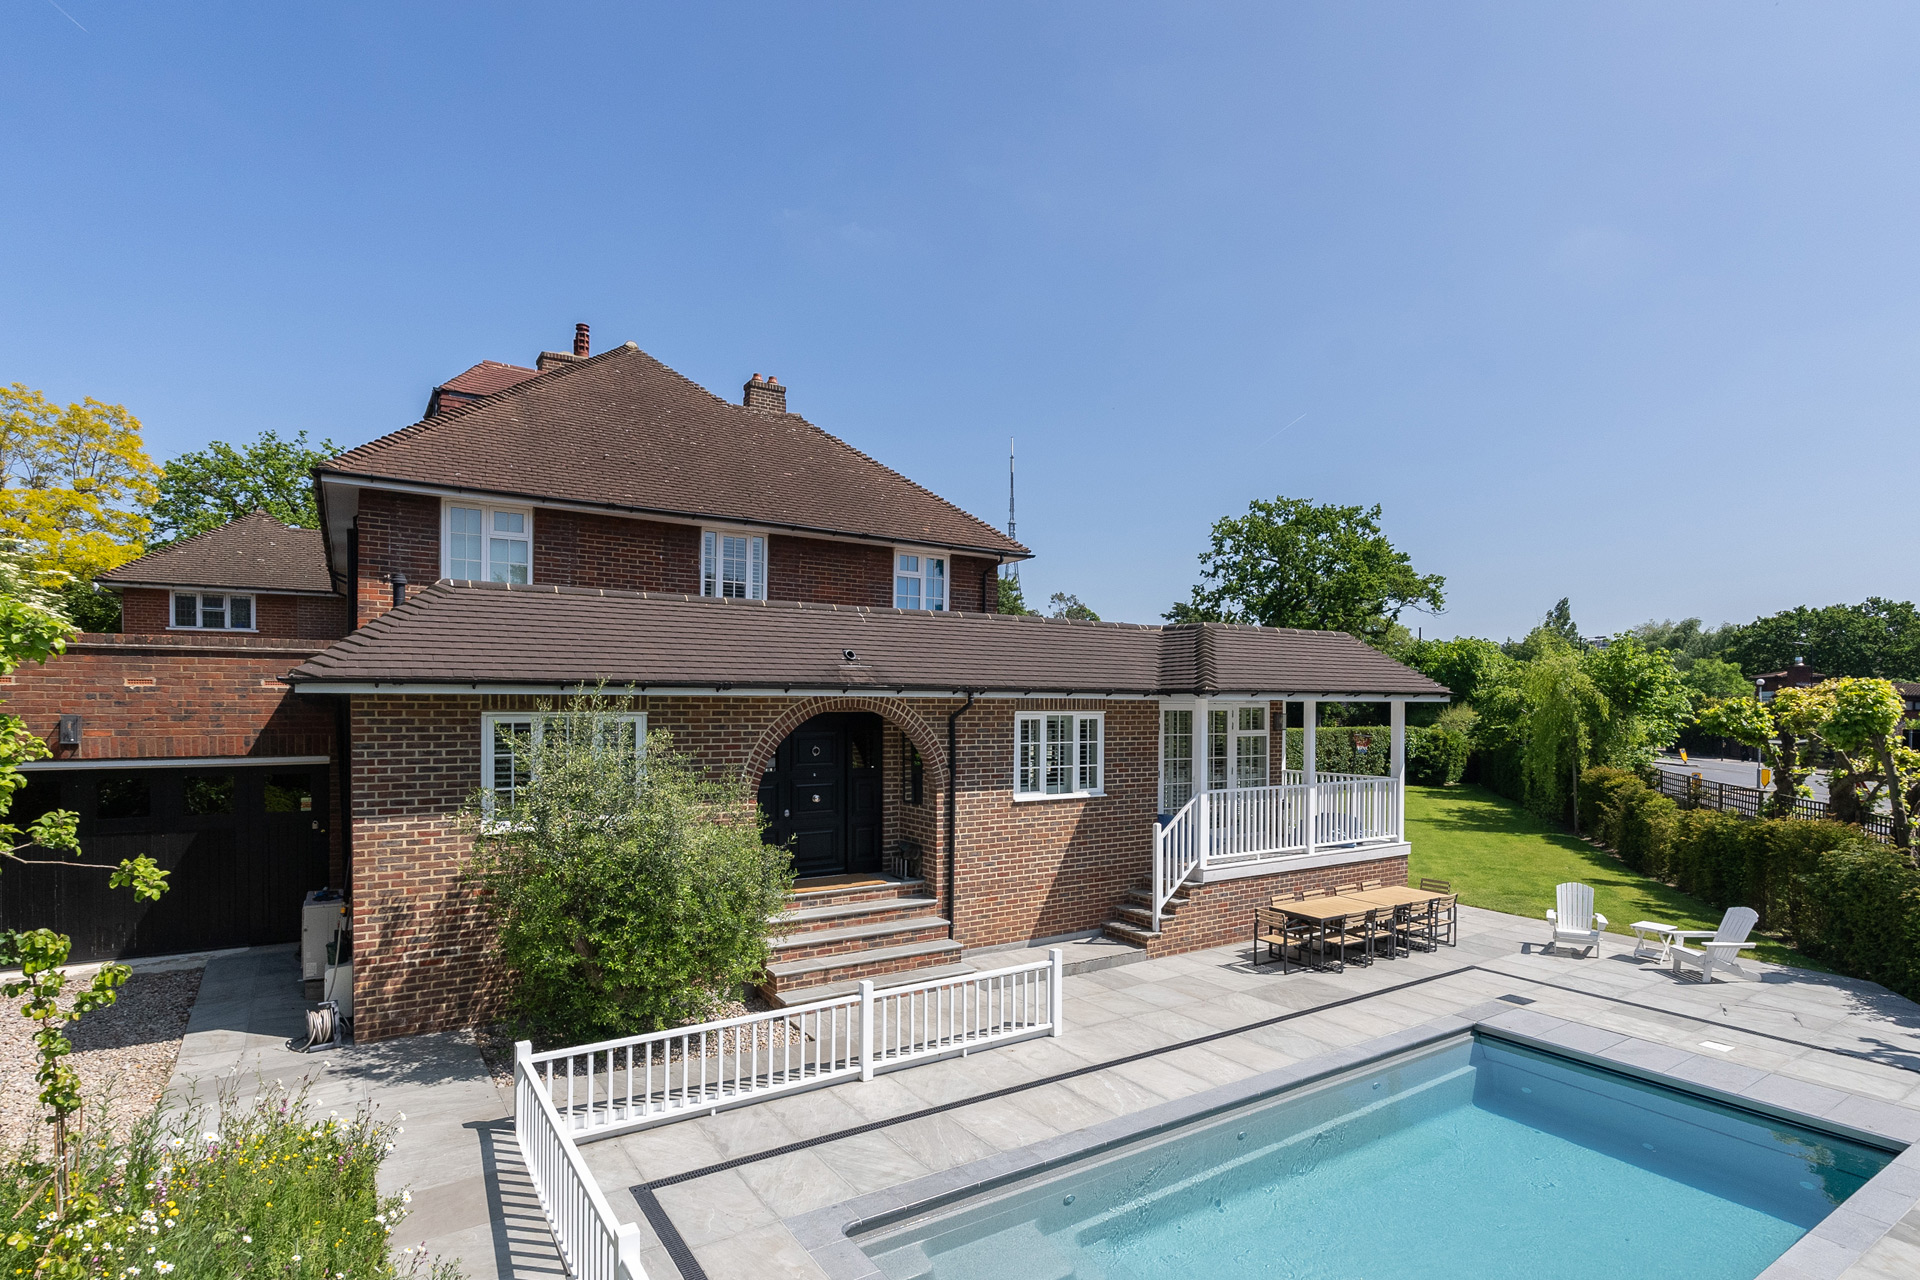 Large detached brick house with outdoor swimming pool.